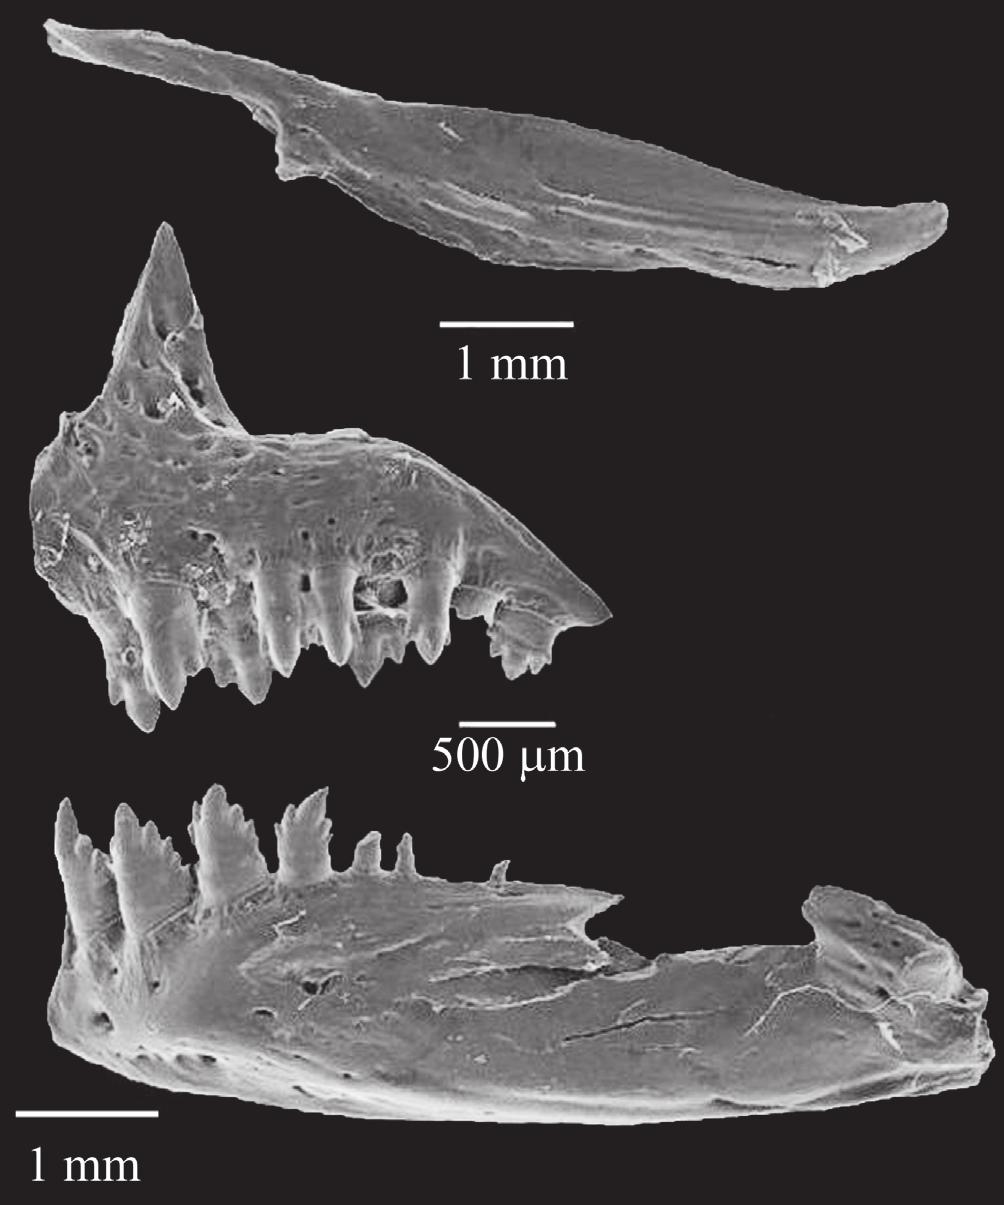 J. M. Wingert & L. R. Malabarba 473 Fig. 2. Maxilla and infraorbitals 1-5 of Bryconops piracolina, right side, MCP 41504, paratype, 35.0 mm SL, c&s.